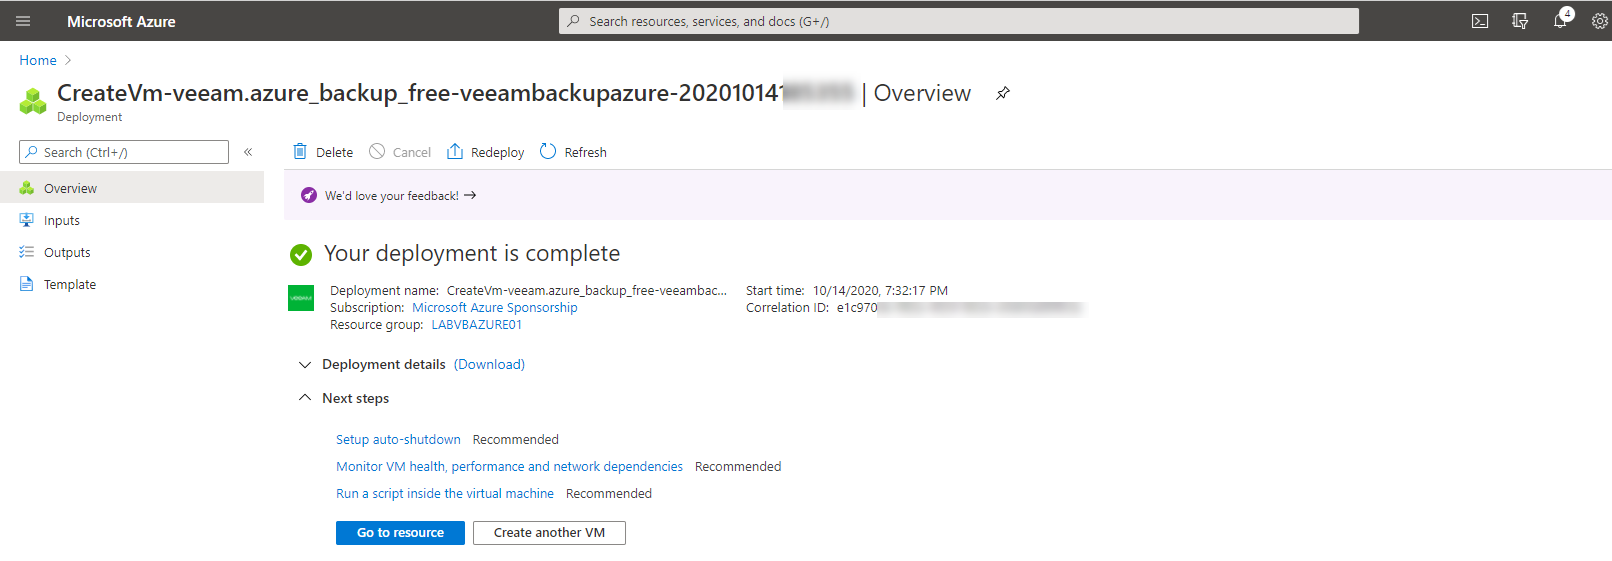 102020 1922 HowtoInstal26 - How to Install Veeam Backup for Microsoft Azure 1.0